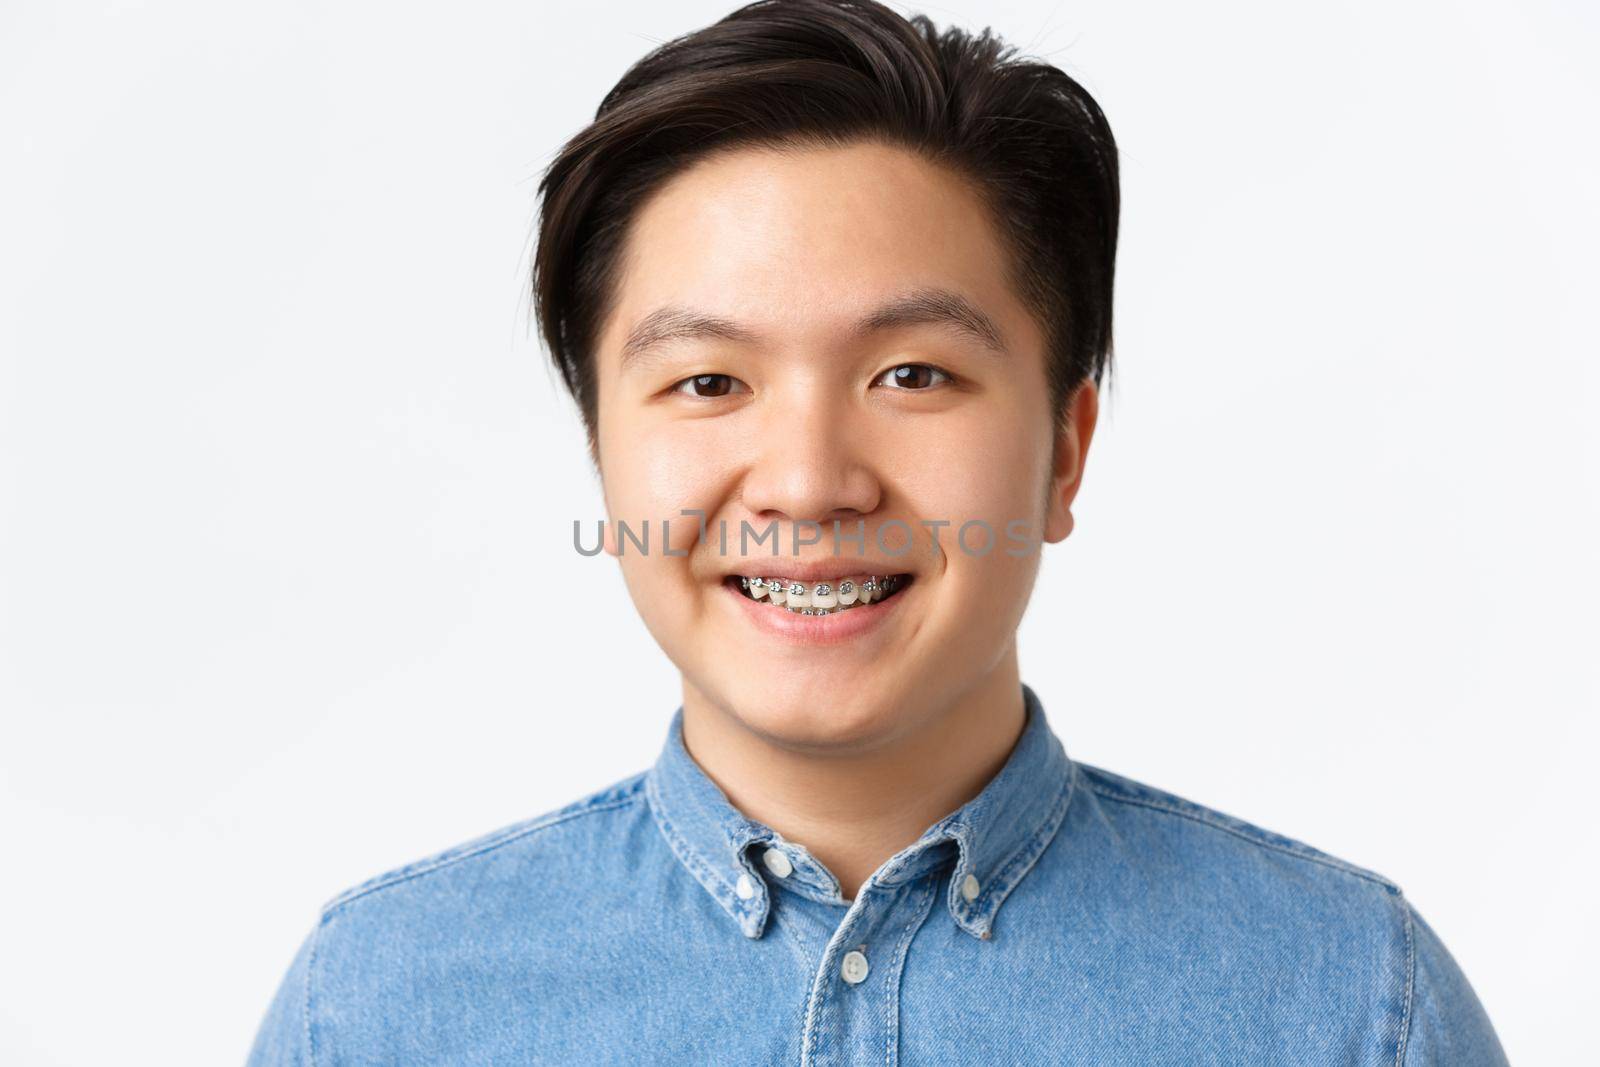 Orthodontics, dental care and stomatology concept. Close-up portrait of handsome asian man with teeth braces, smiling pleased, looking hopeful and happy, standing white background.